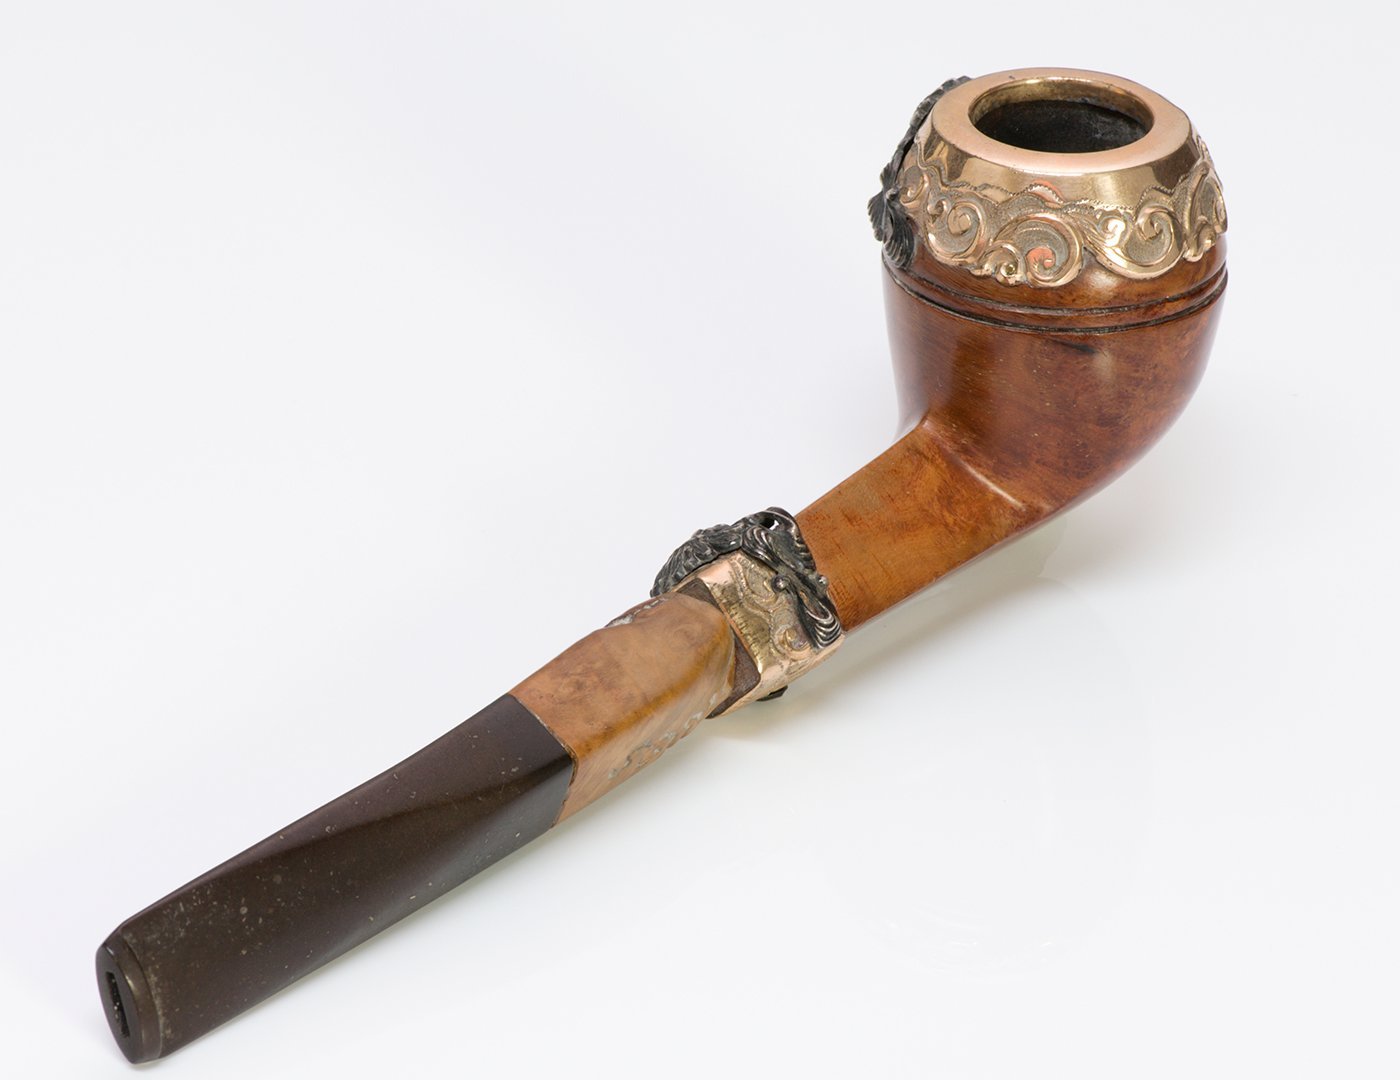 Antique Gold Silver Walnut Wood Tobacco Smoking Pipe